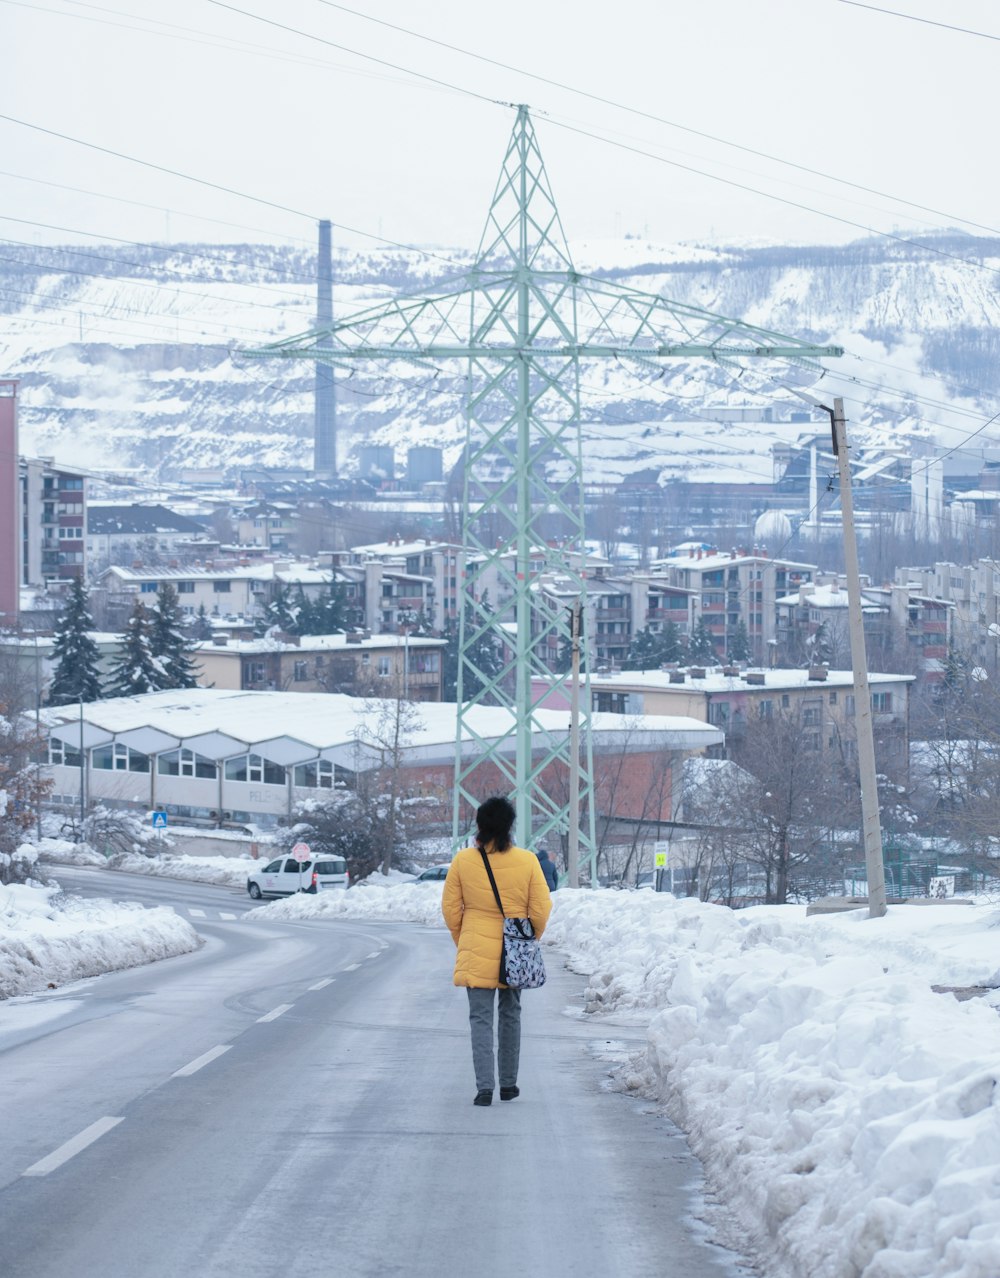 a man walking on a road with snow on the side and a large tower in the background